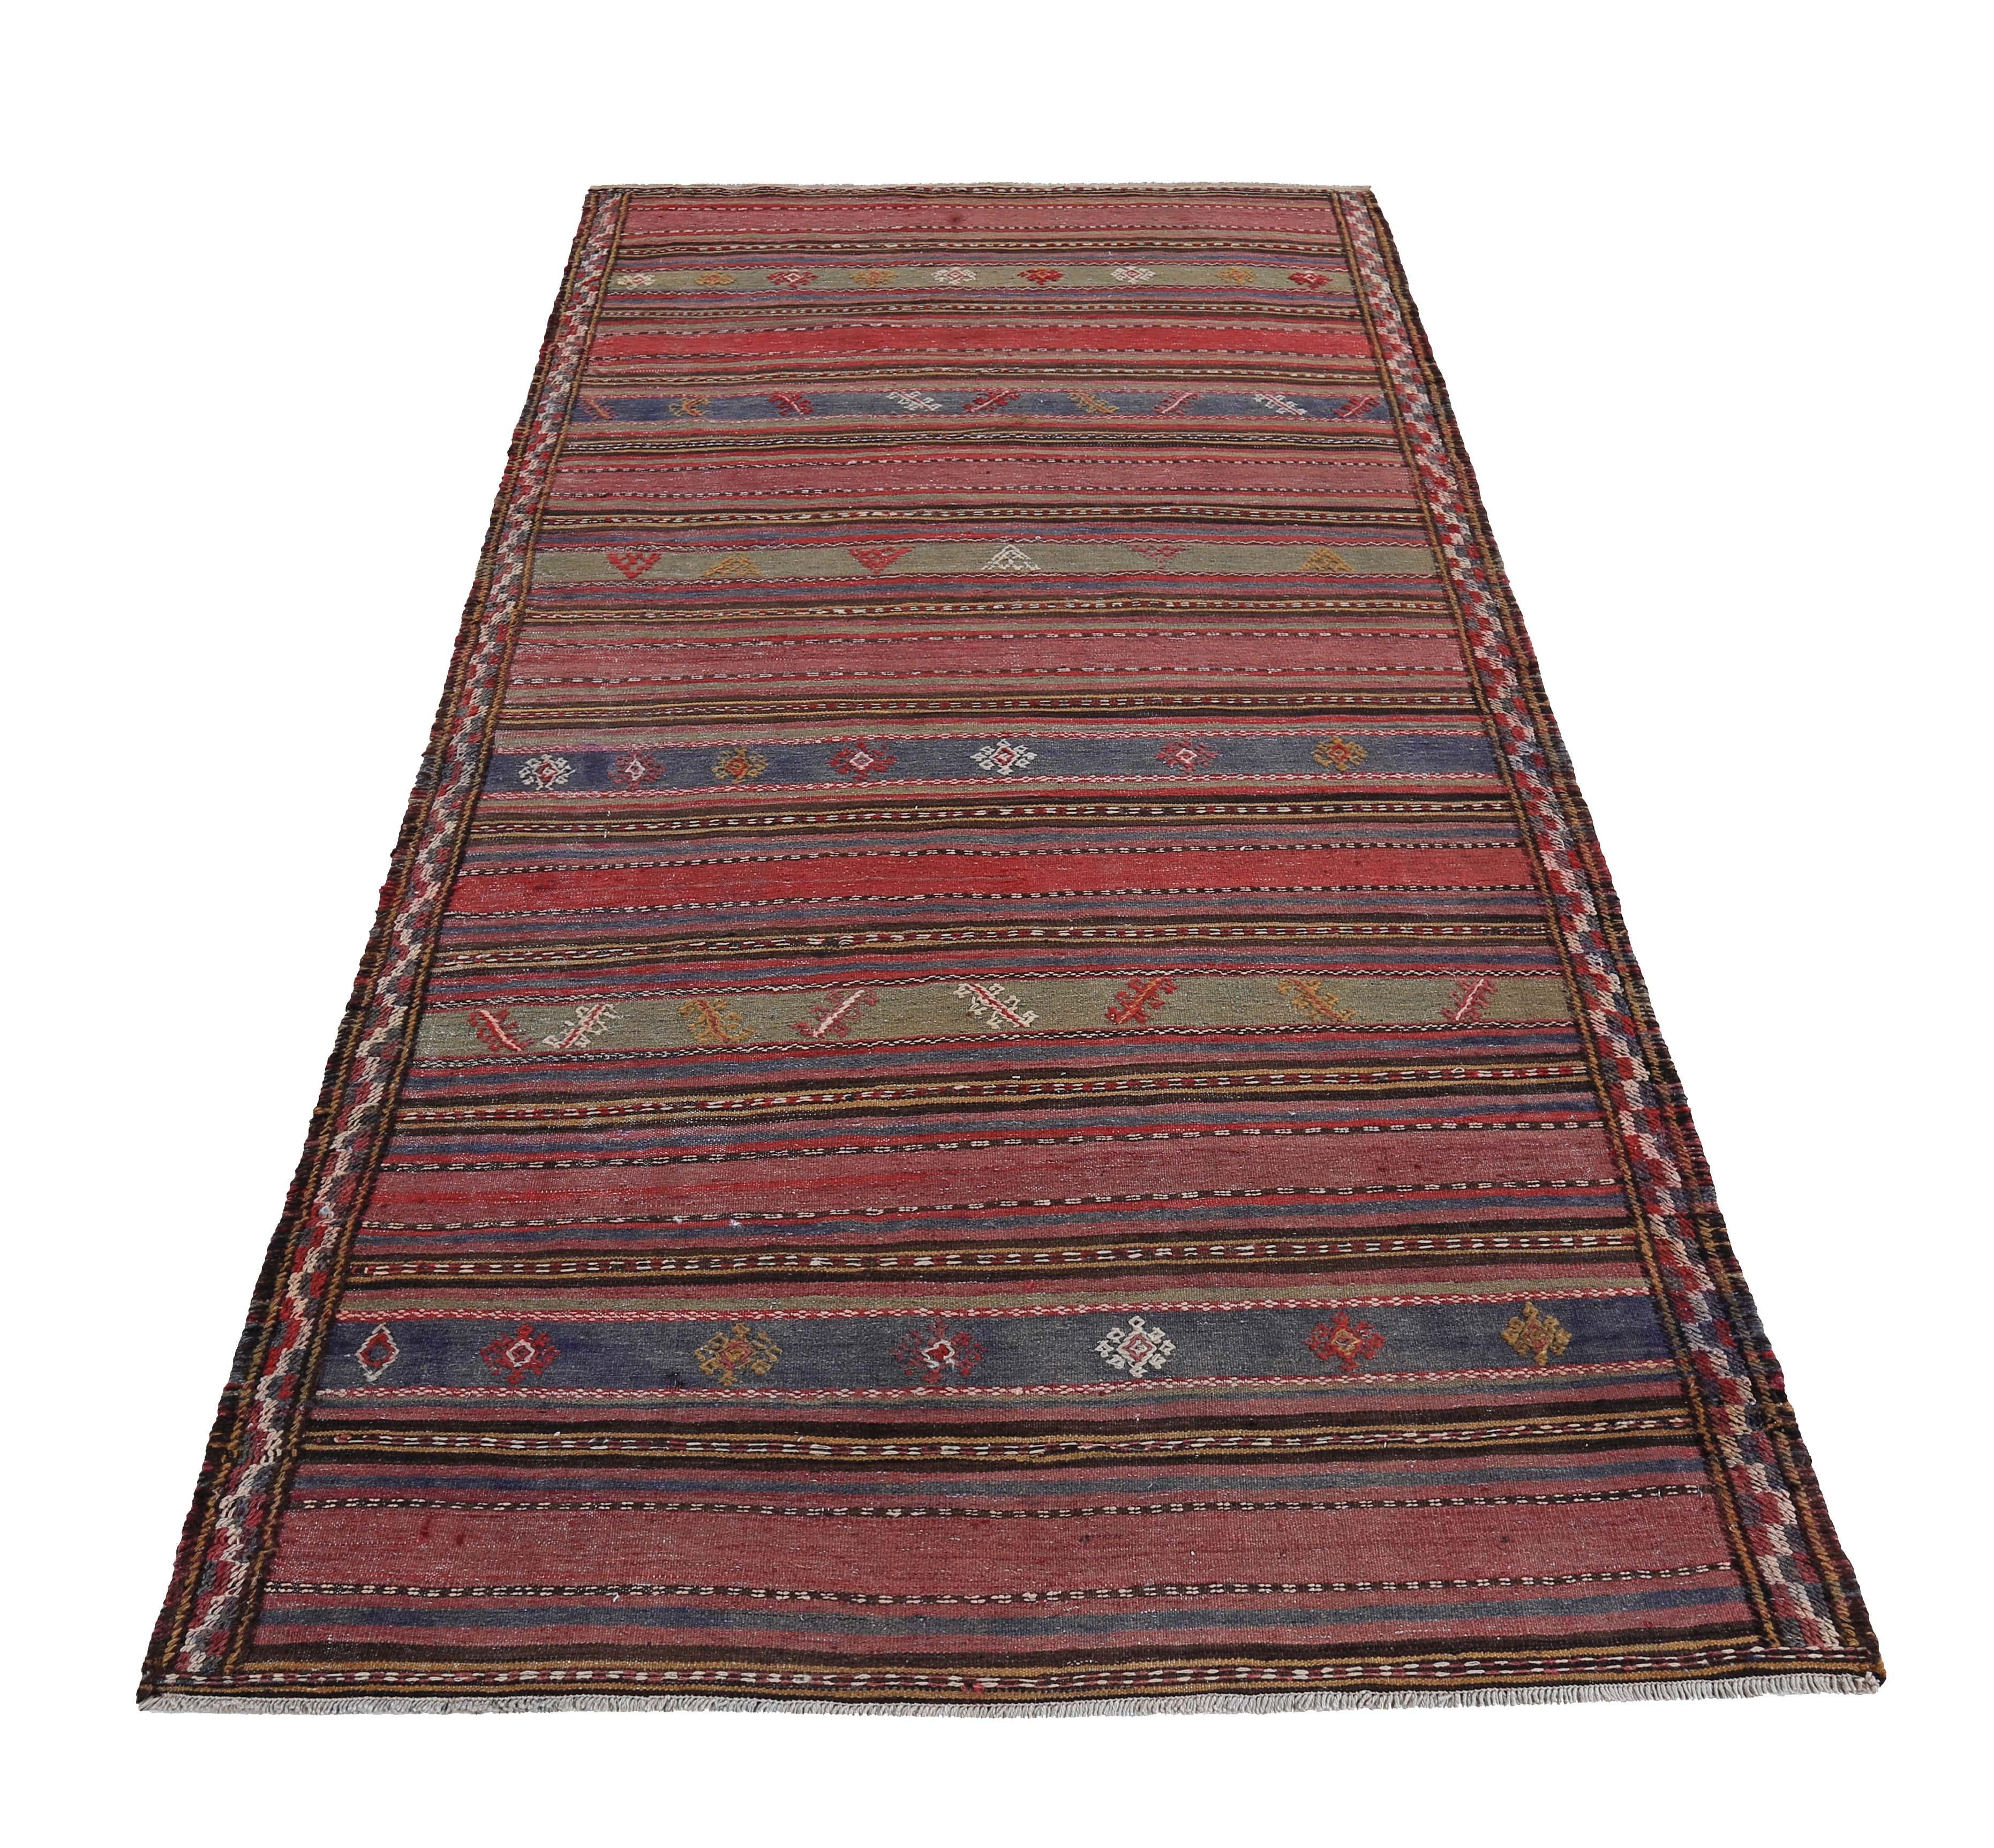 Modern Turkish rug handwoven from the finest sheep’s wool and colored with all-natural vegetable dyes that are safe for humans and pets. It’s a traditional Kilim flat-weave design featuring a brown field with red, green and navy stripes. It’s a